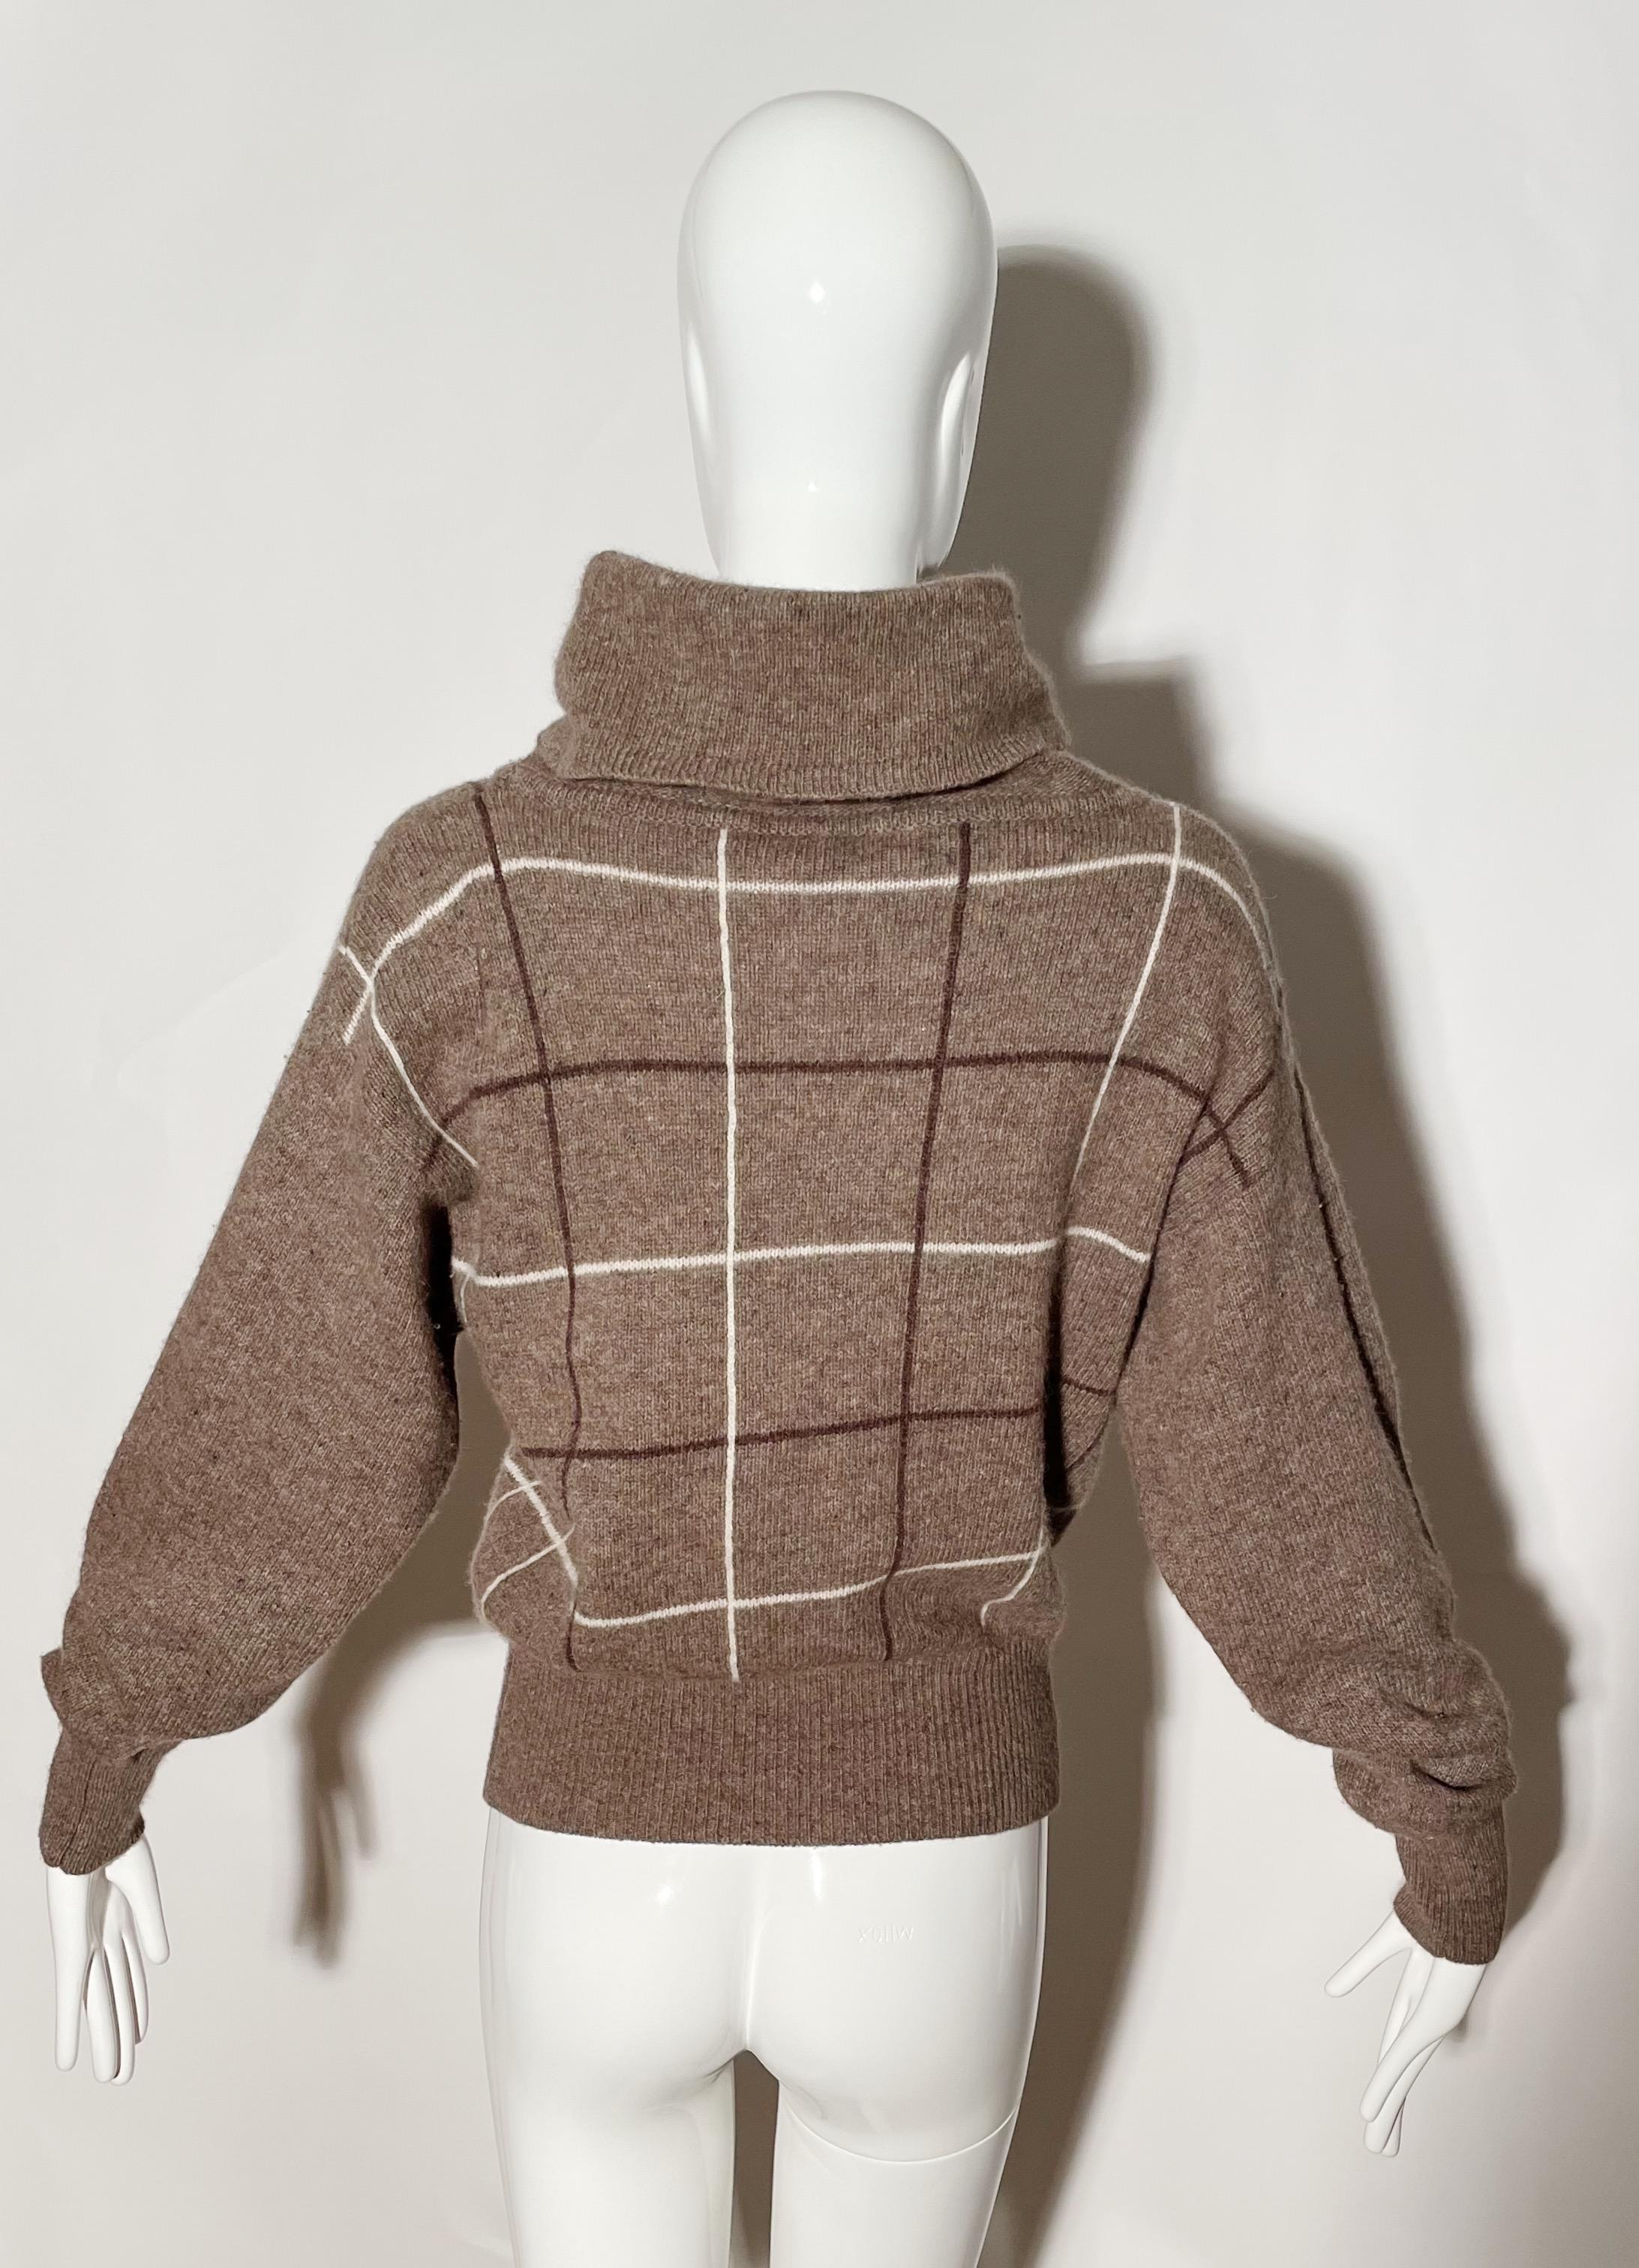 Christian Dior Turtleneck Sweater  In Excellent Condition For Sale In Los Angeles, CA